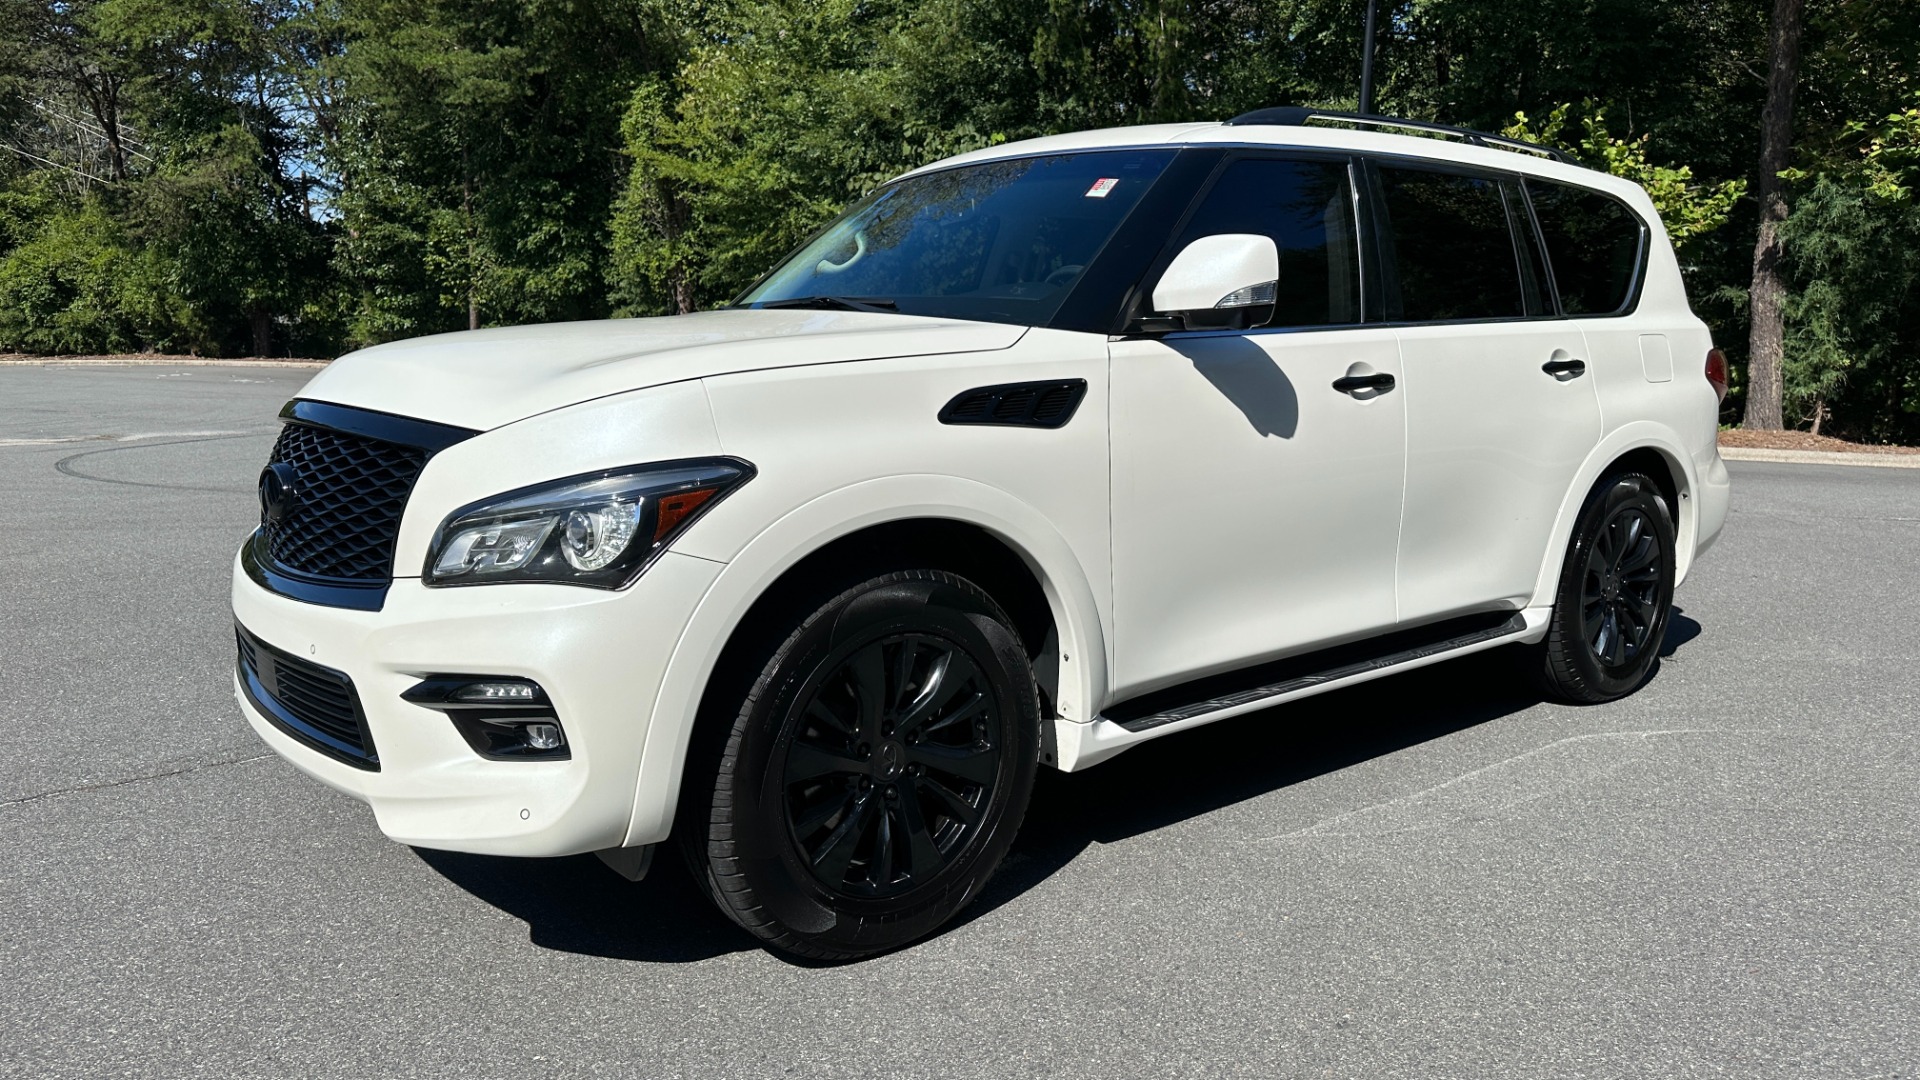 Used 2017 INFINITI QX80 SIGNATURE EDITION / 3 ROW SEATING / NAV / LEATHER for sale $25,995 at Formula Imports in Charlotte NC 28227 2